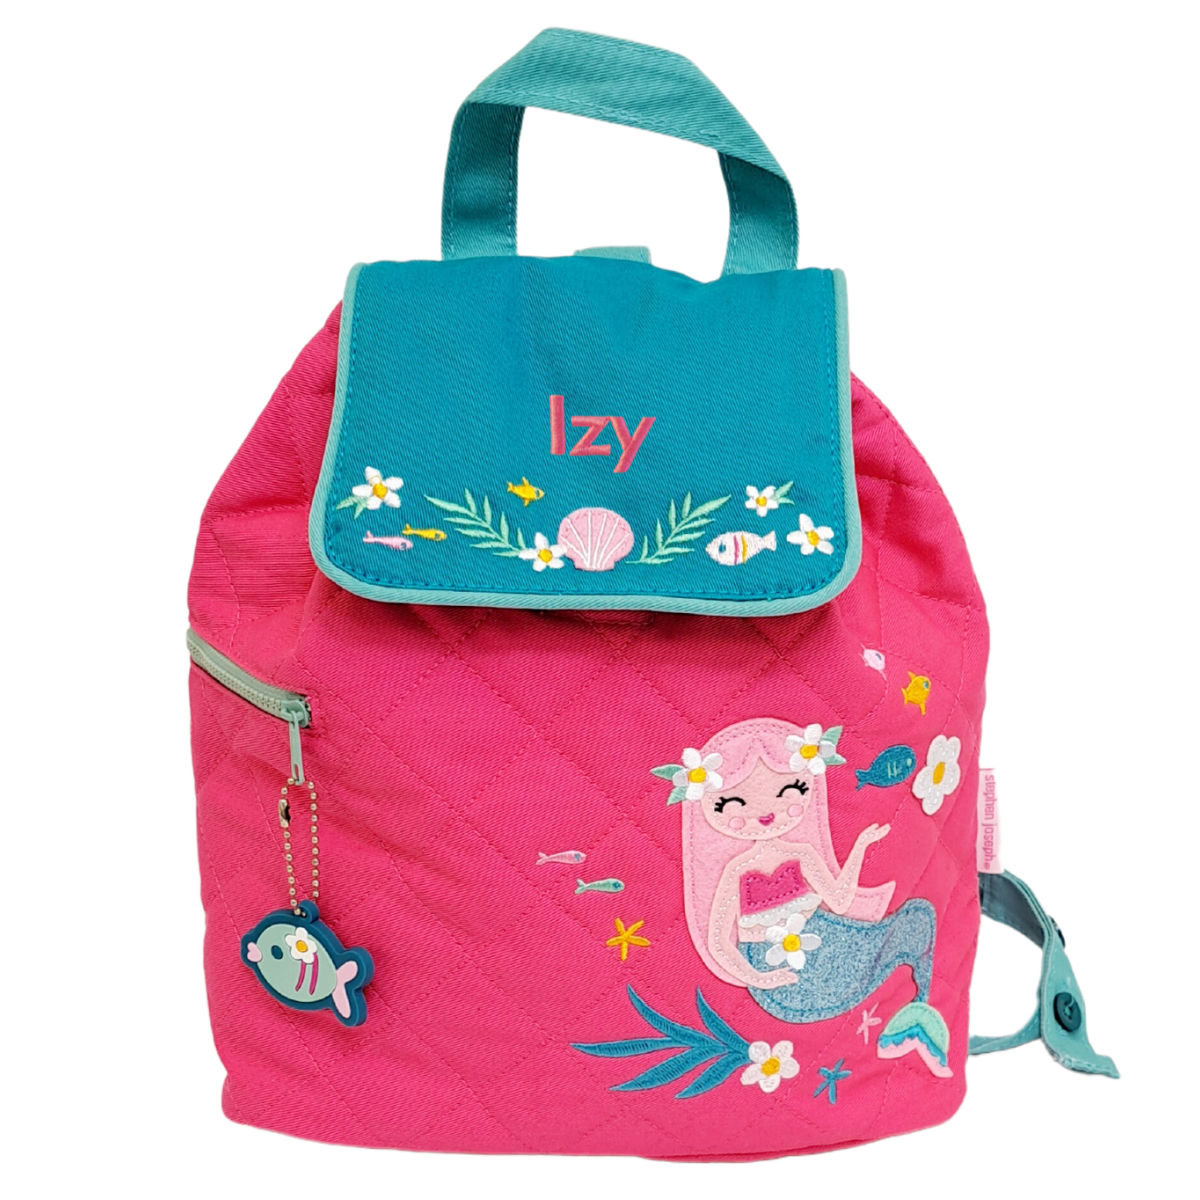 Image of a Stephen Joseph quilted backpack. The bag has a fuchsia pink main body with an appliqued mermaid on the front. The bag has a flap whcih is green in colour and it has a shell and little fish embroidered on it. The bag can be personalised with a name of up to 10 characters which will be embroidered on the flap.